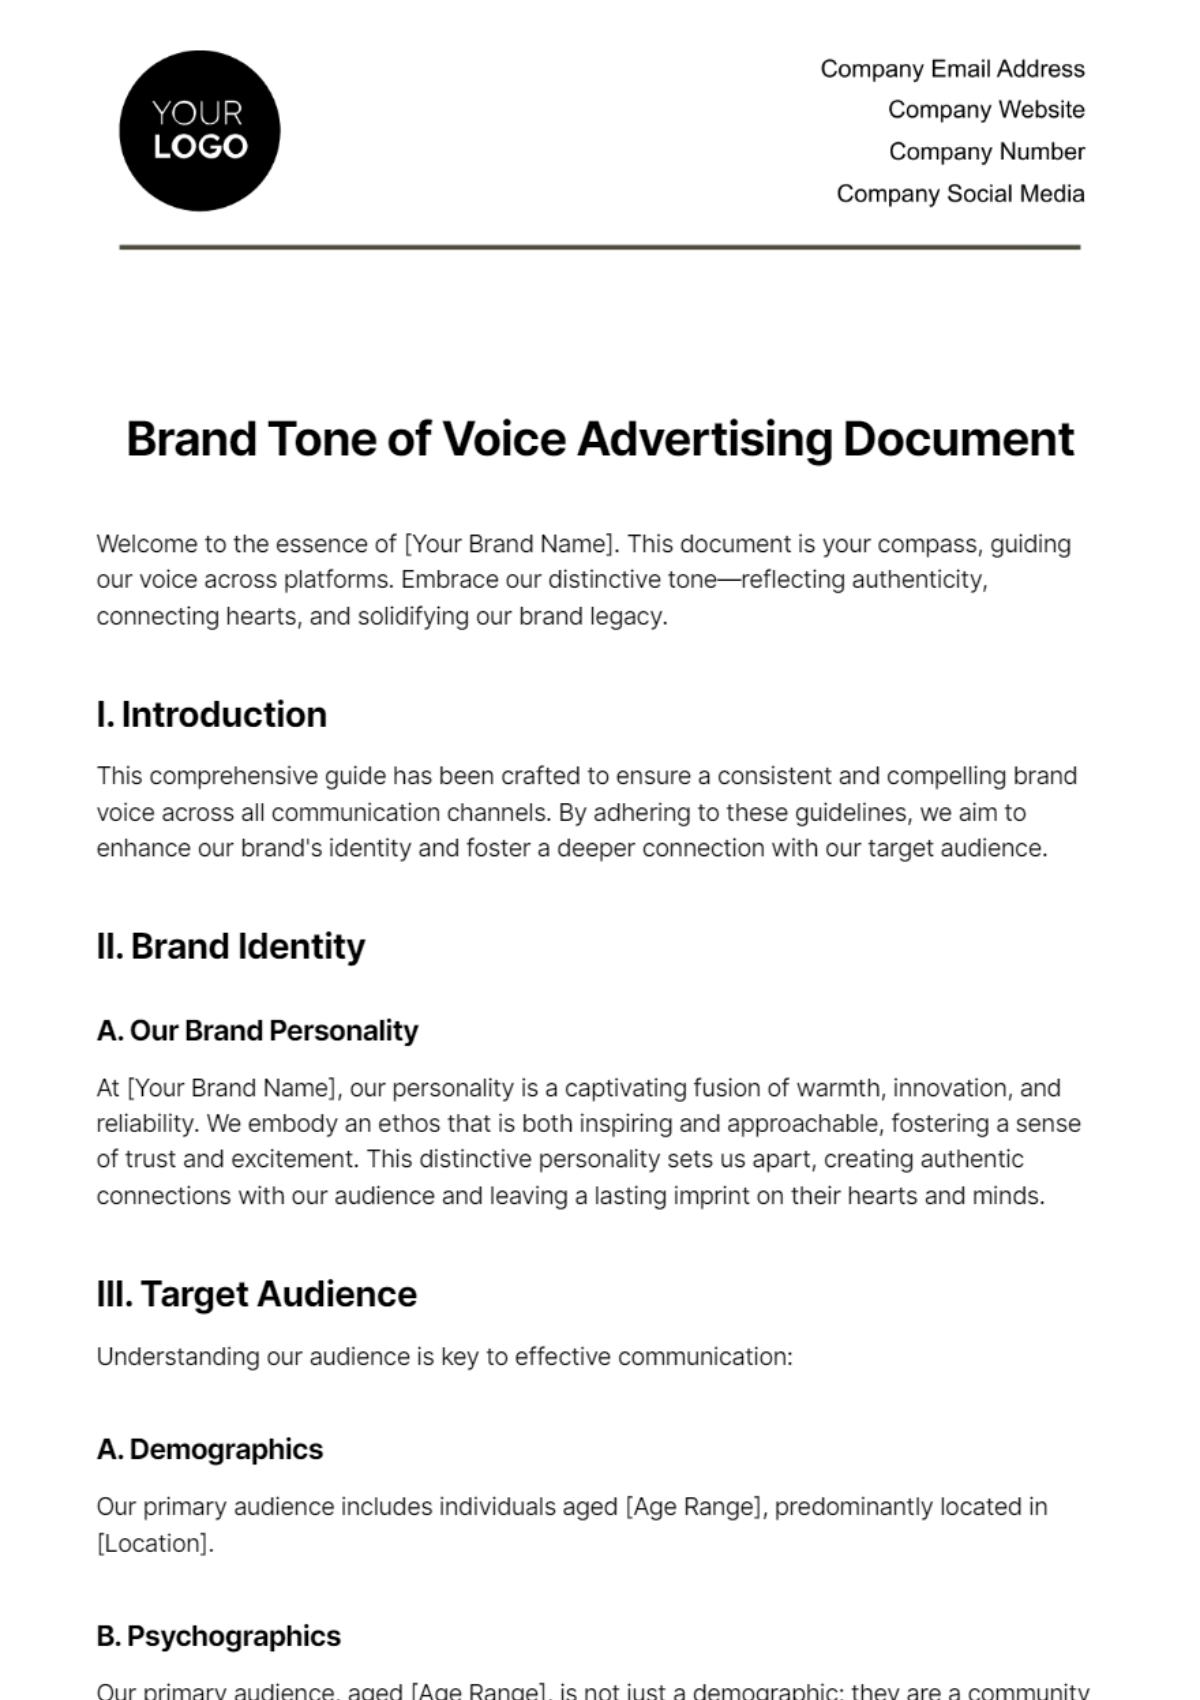 Brand Tone of Voice Advertising Document Template